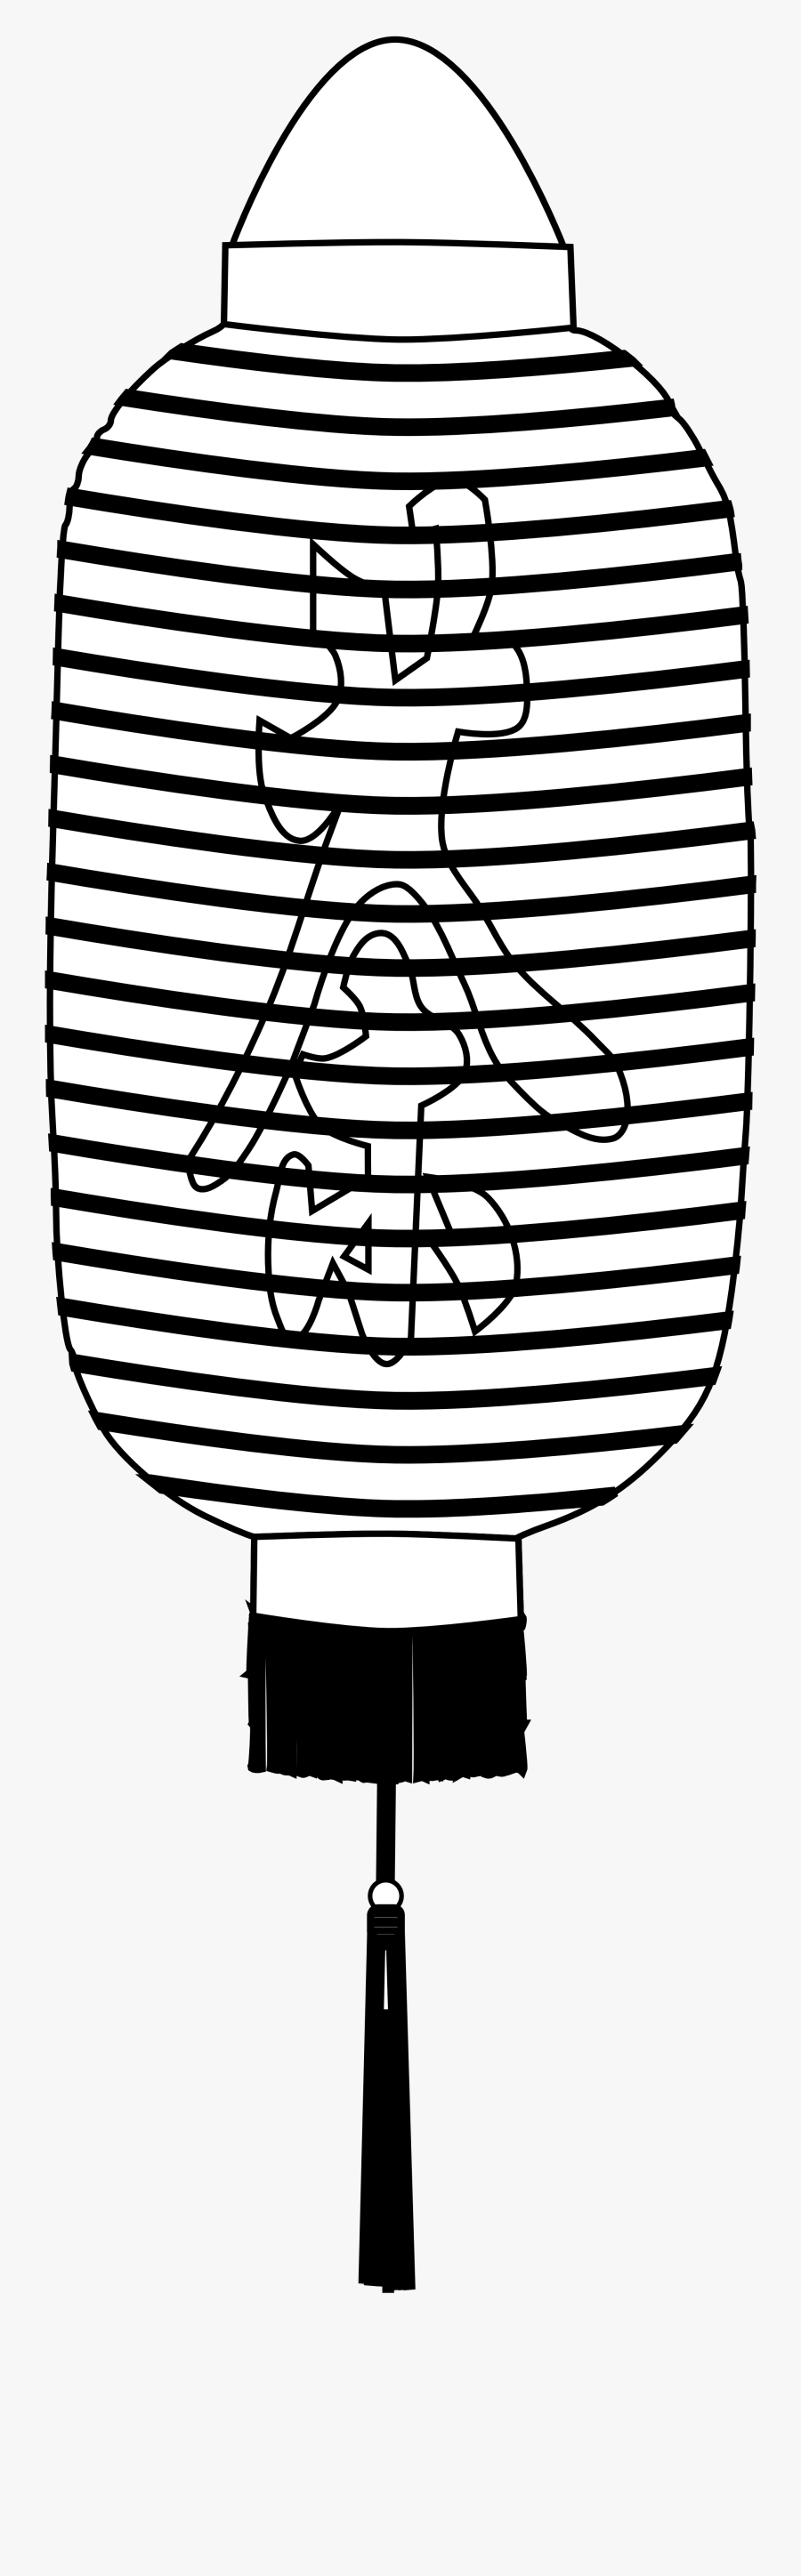 Hanging Chinese Lantern Clipart Black And White, Transparent Clipart